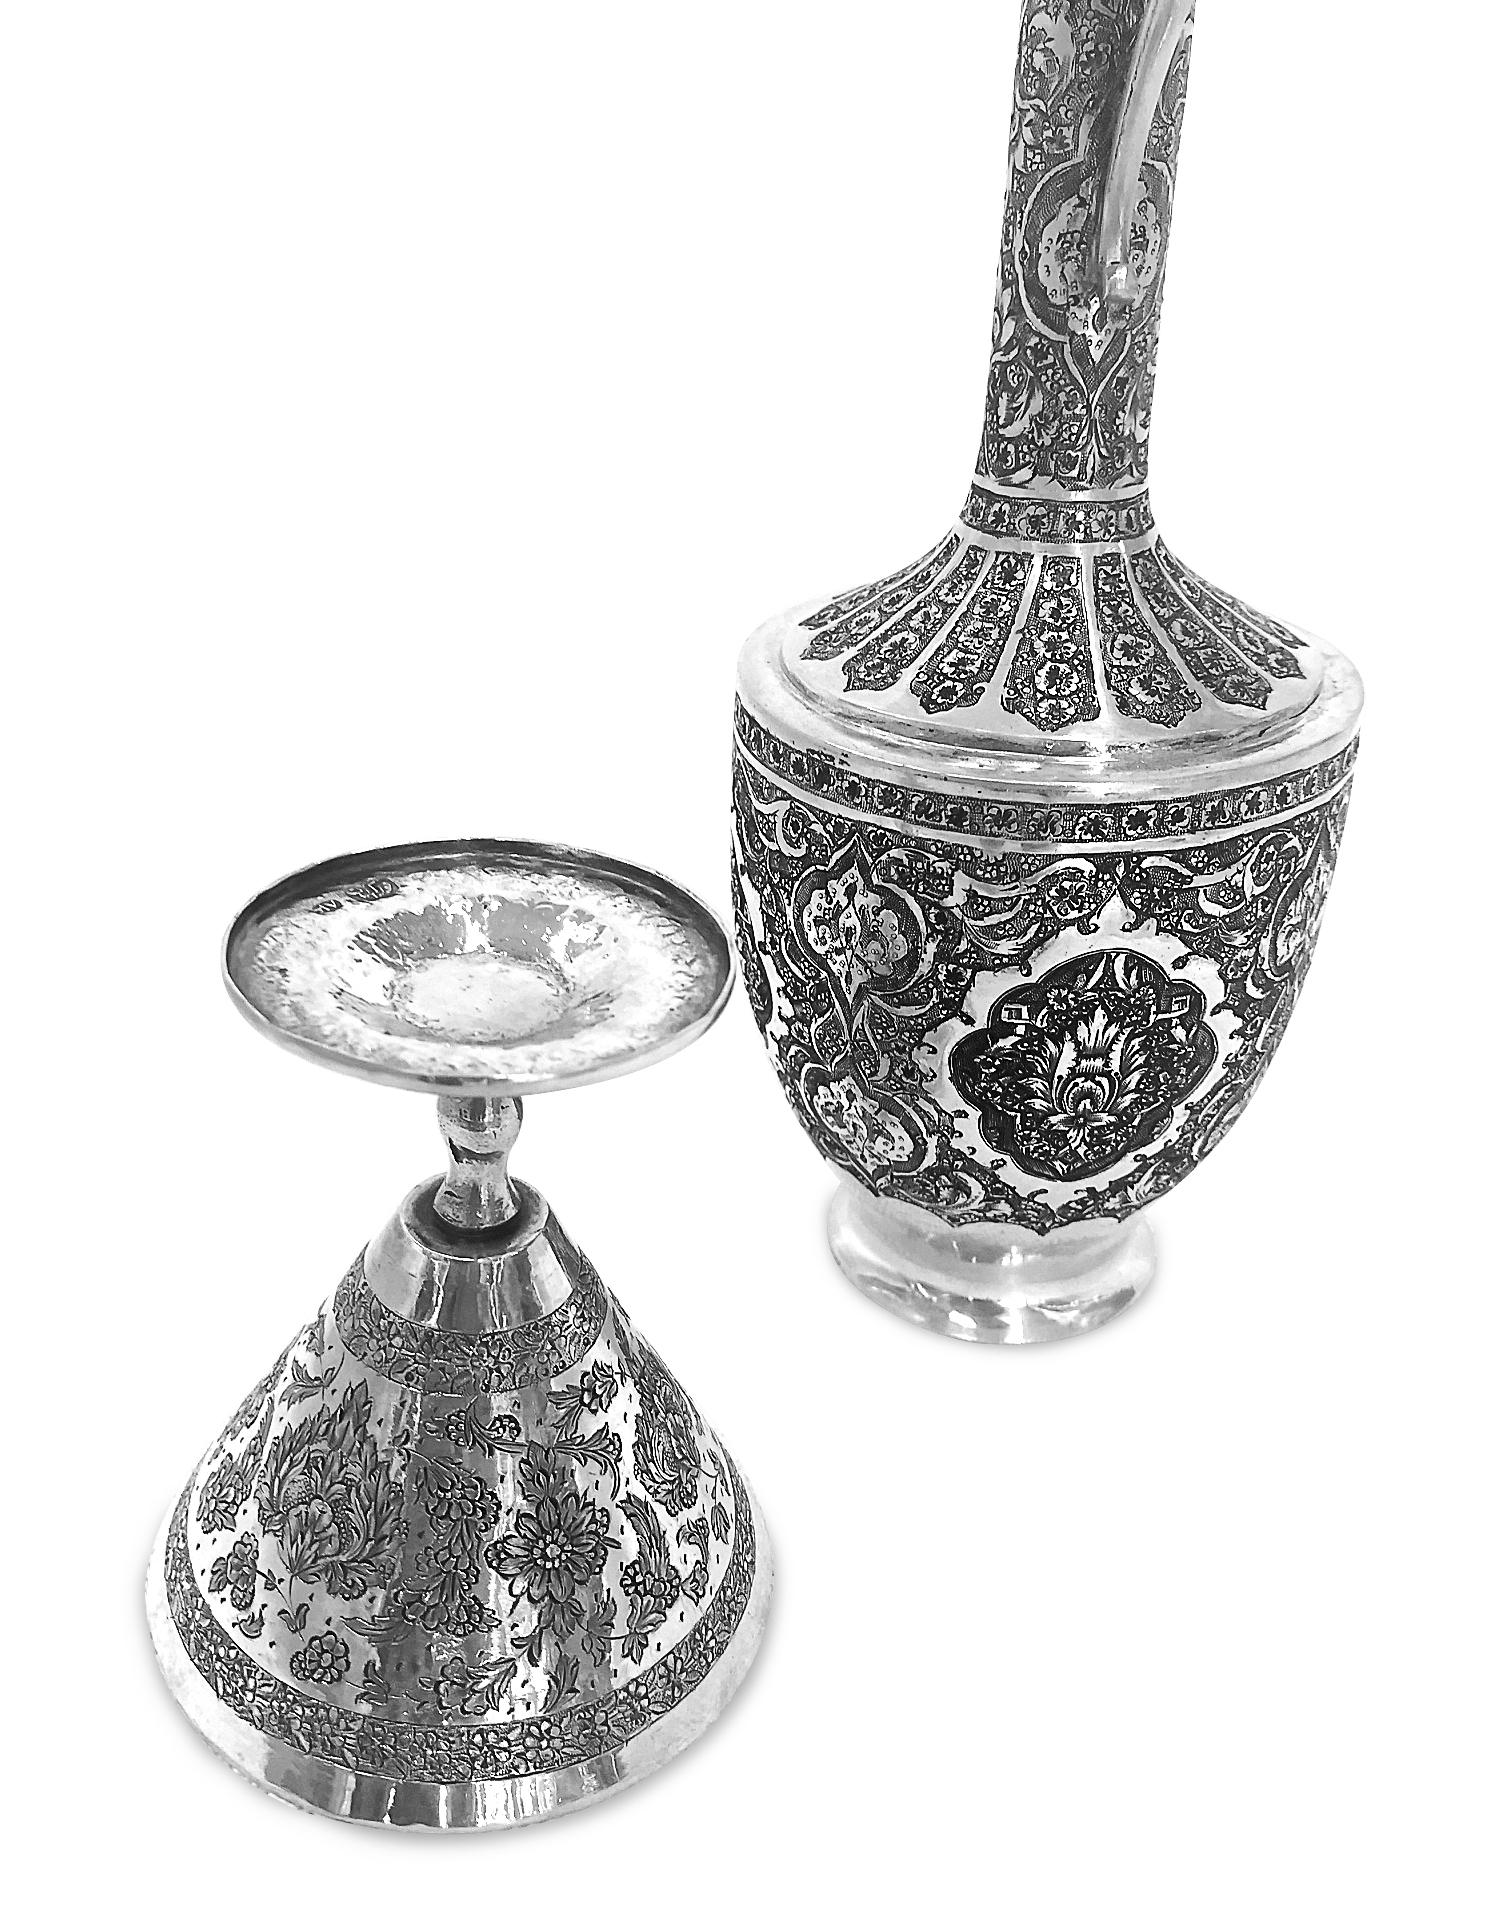 Women's or Men's Antique Gorgeous Handmade Pitcher, Cup and Tray 8-Piece Set Silver For Sale